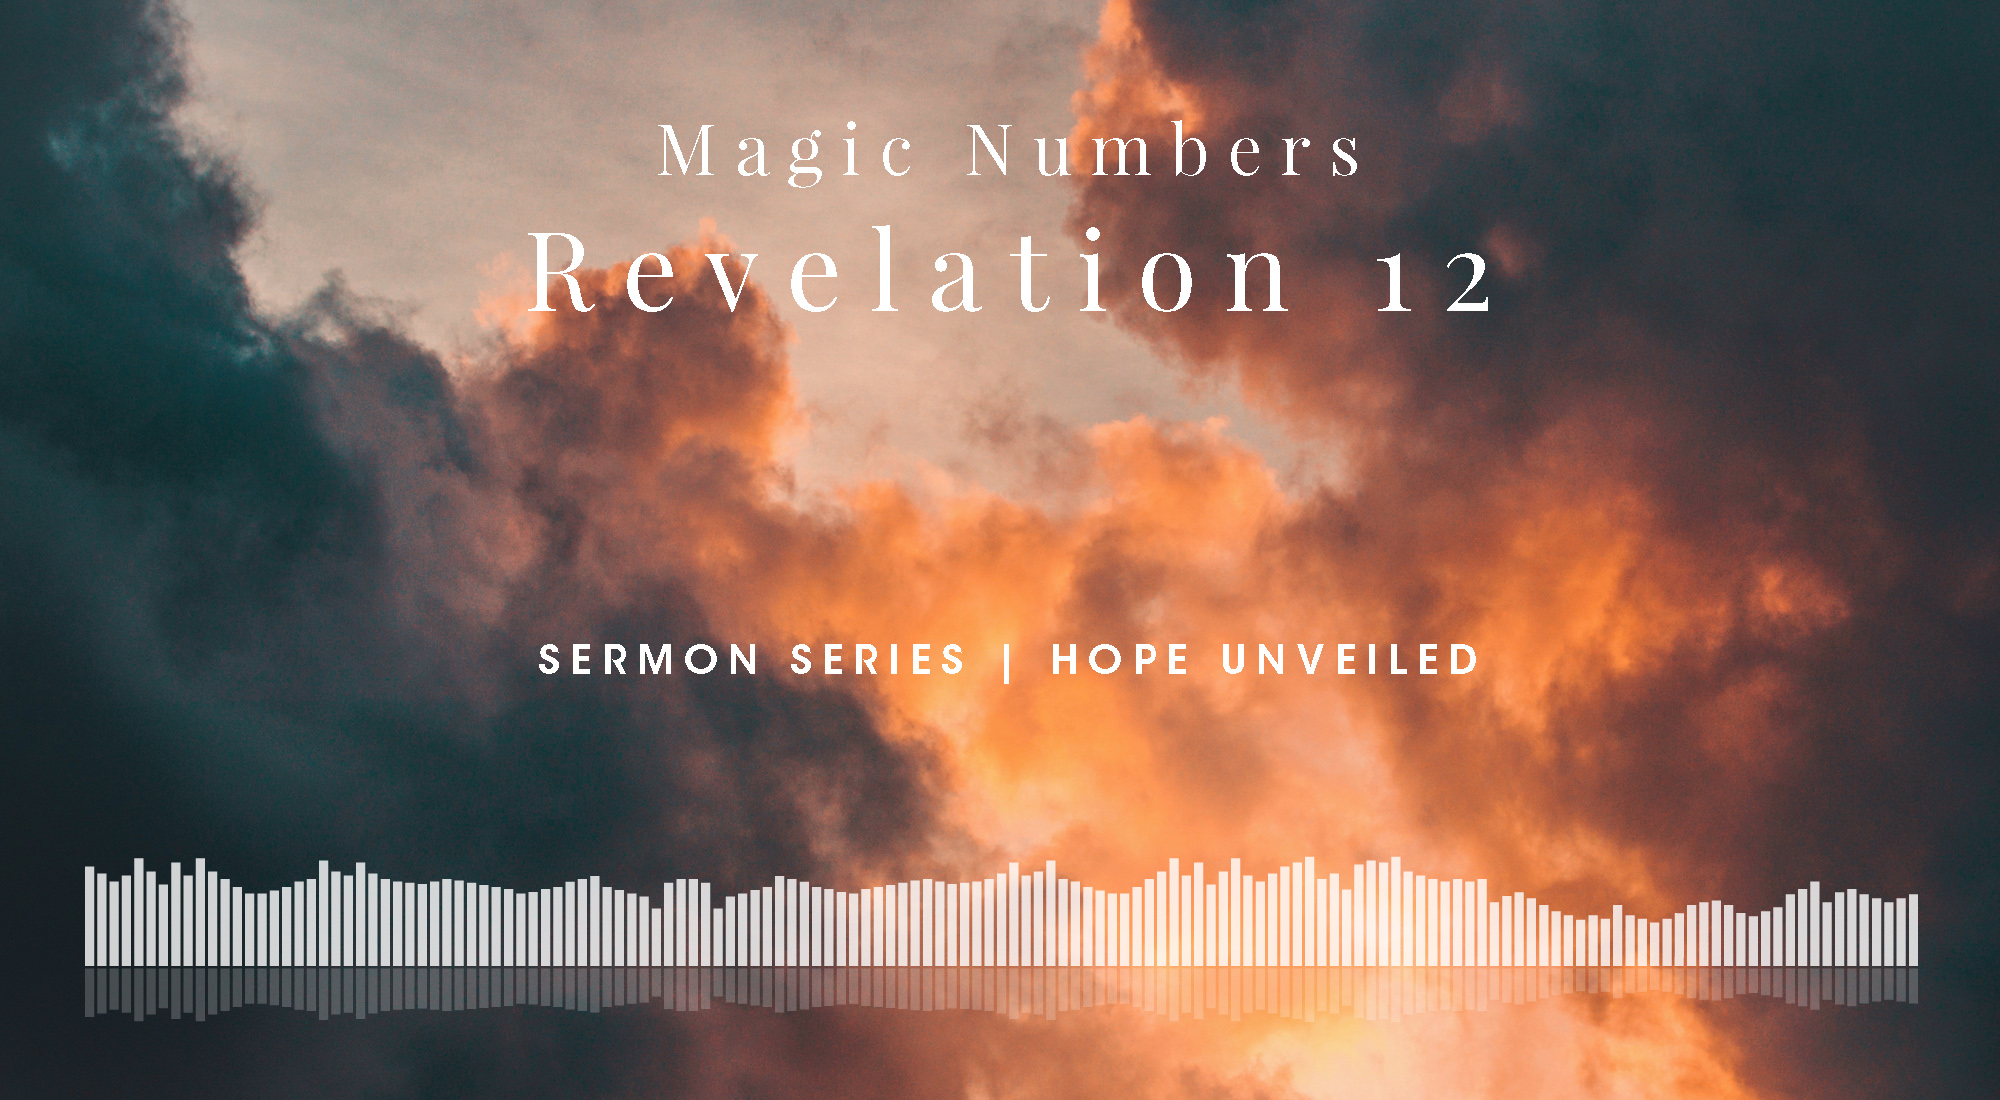 Magic Numbers, Revelation 12, From Our Hope Unveiled Sermon Series